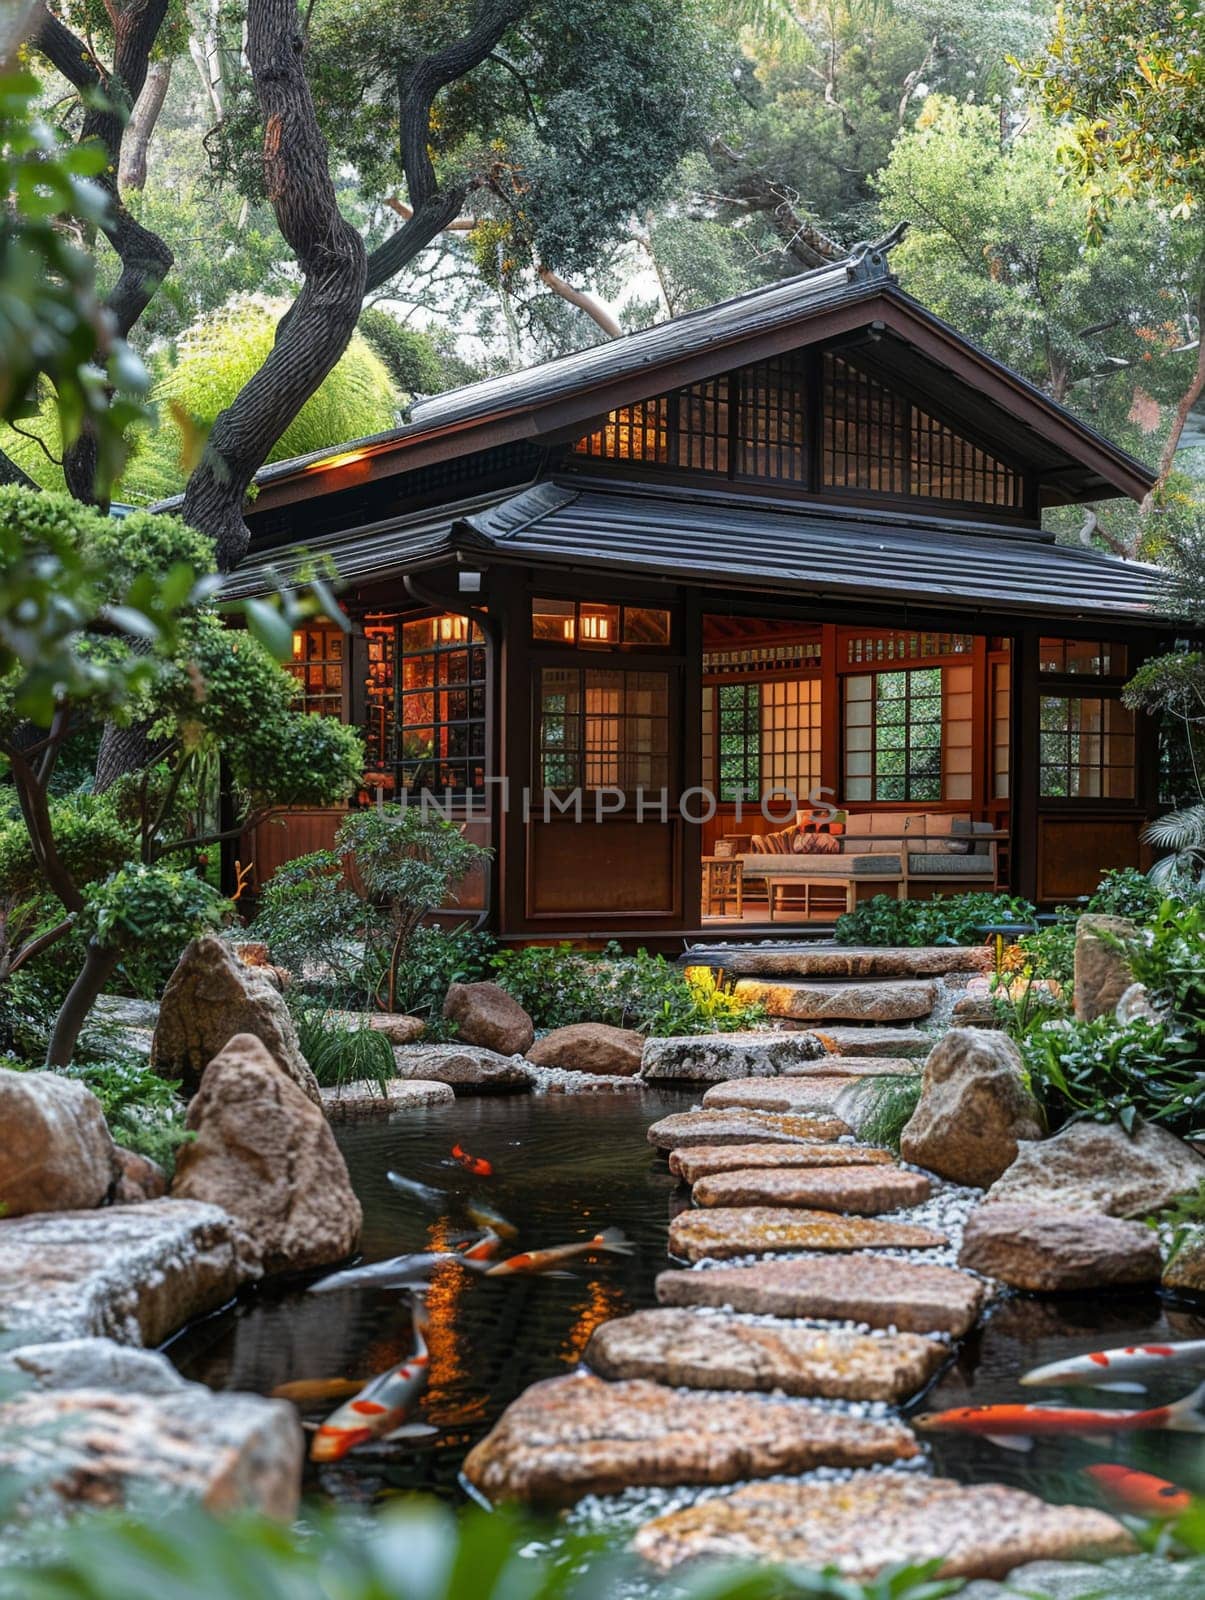 Tranquil Backyard Zen Inspired Sanctuary, with stone path leading to serene koi pond.